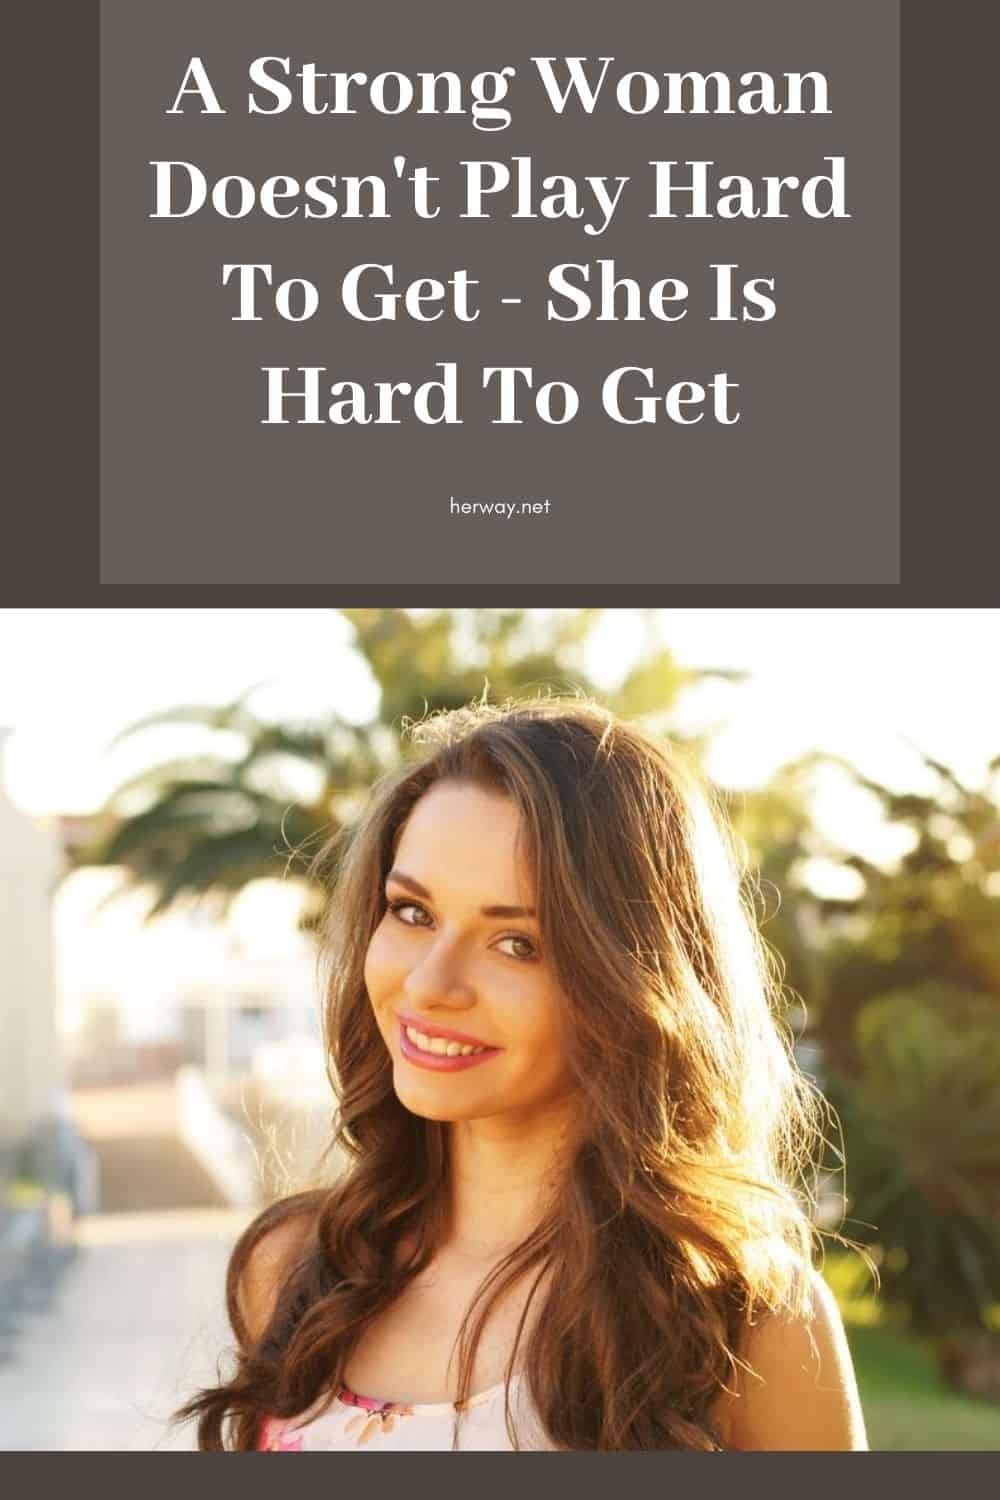 A Strong Woman Doesn't Play Hard To Get - She Is Hard To Get